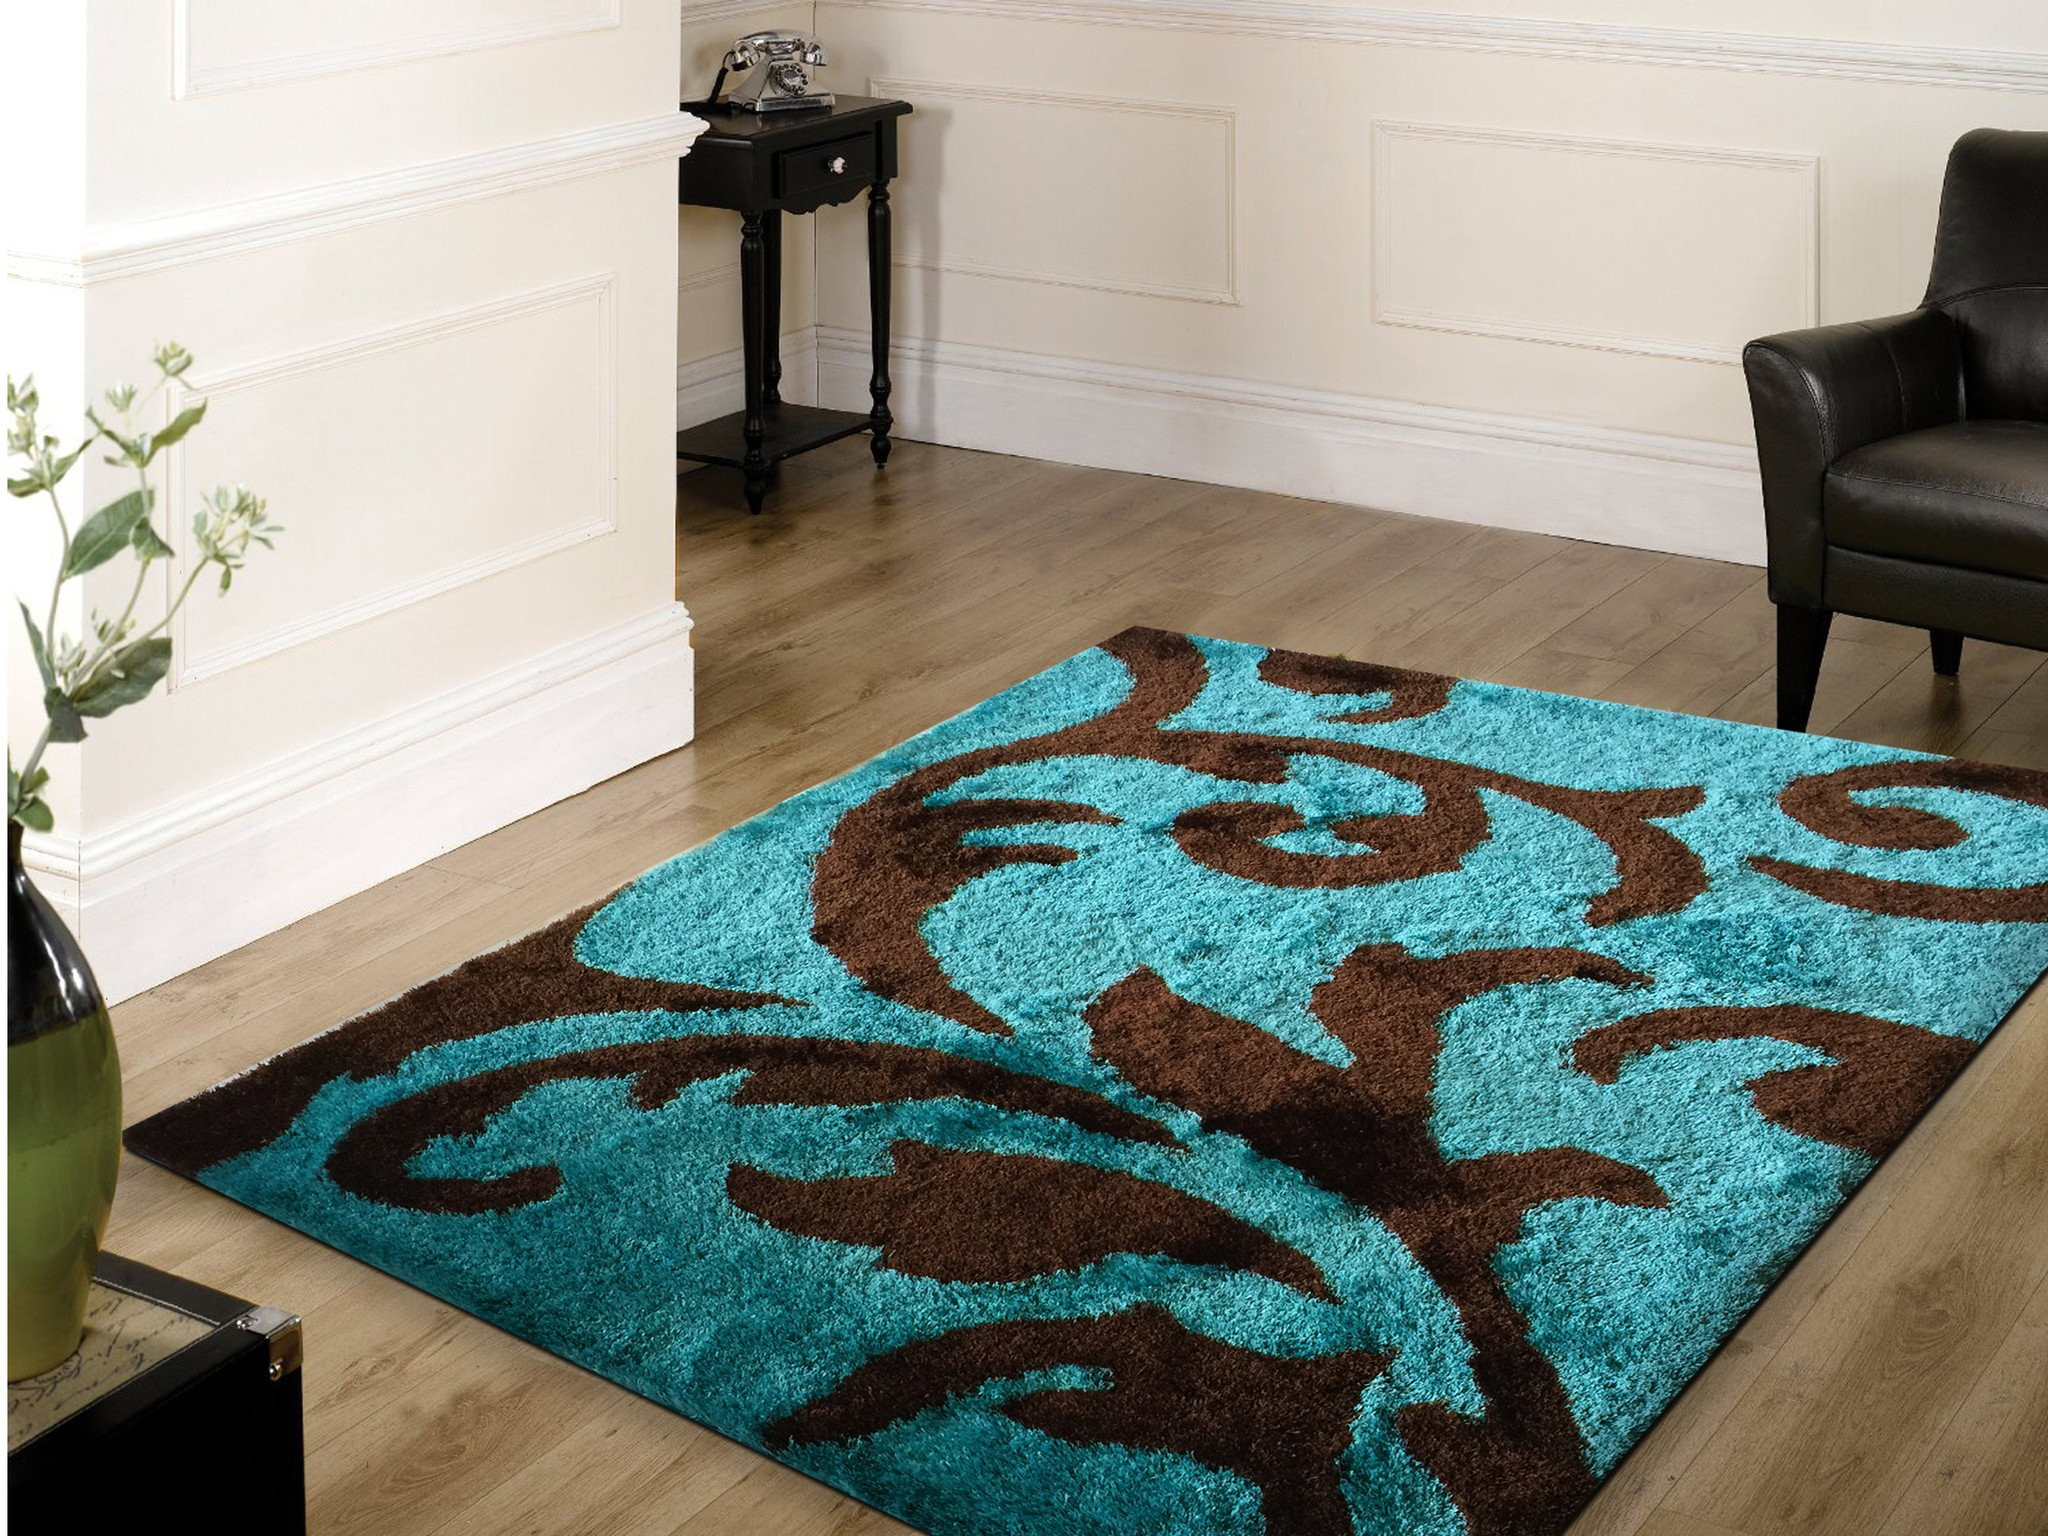 Turquoise Rug Living Room
 Soft Indoor Bedroom Shag Area Rug Brown with Turquoise